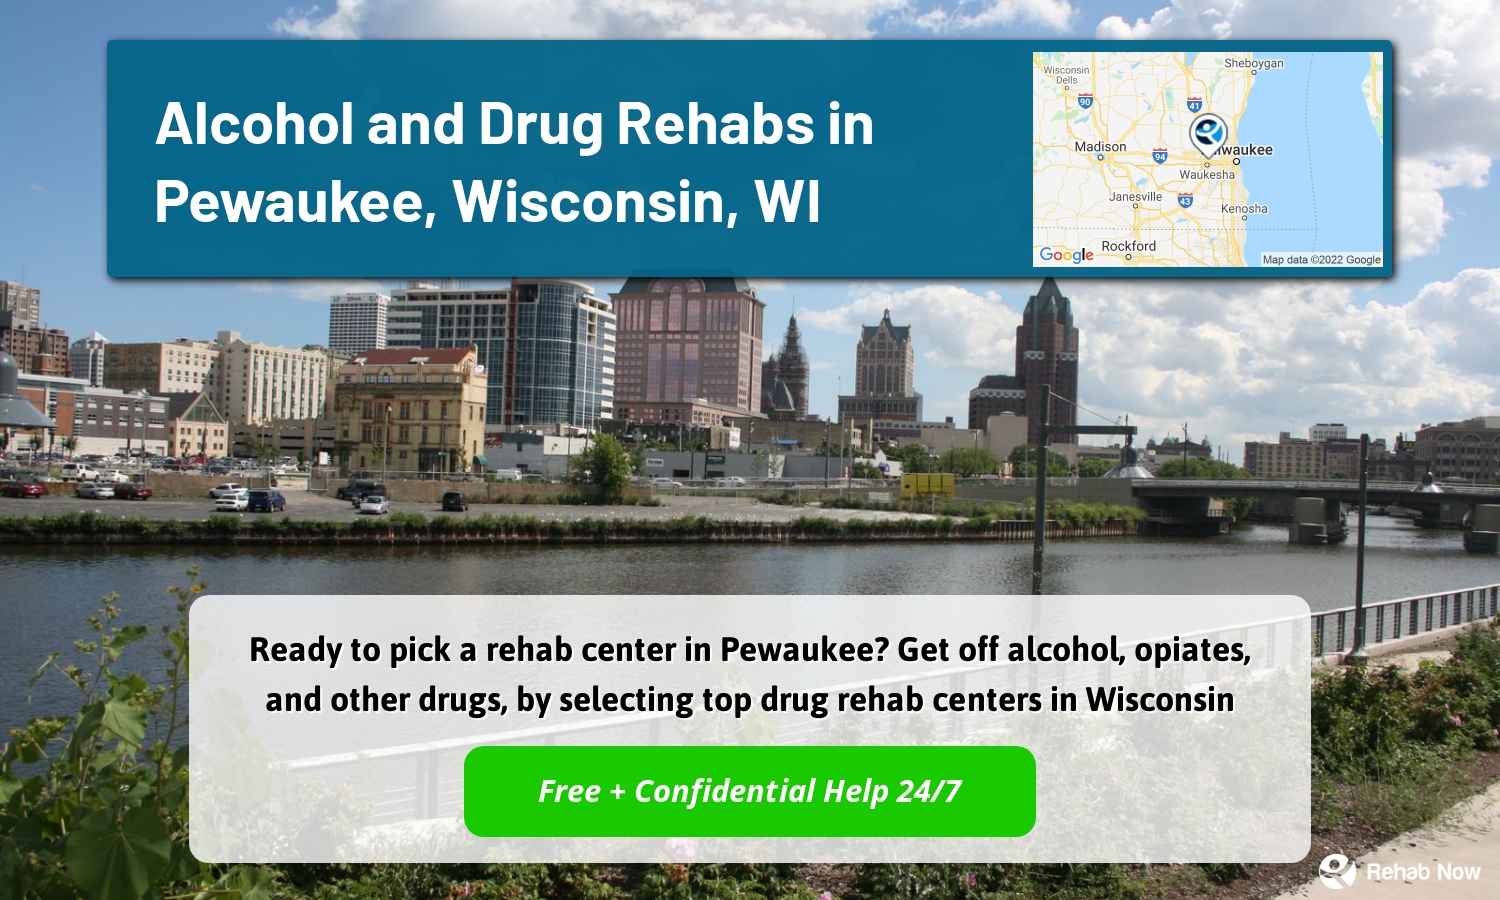 Ready to pick a rehab center in Pewaukee? Get off alcohol, opiates, and other drugs, by selecting top drug rehab centers in Wisconsin